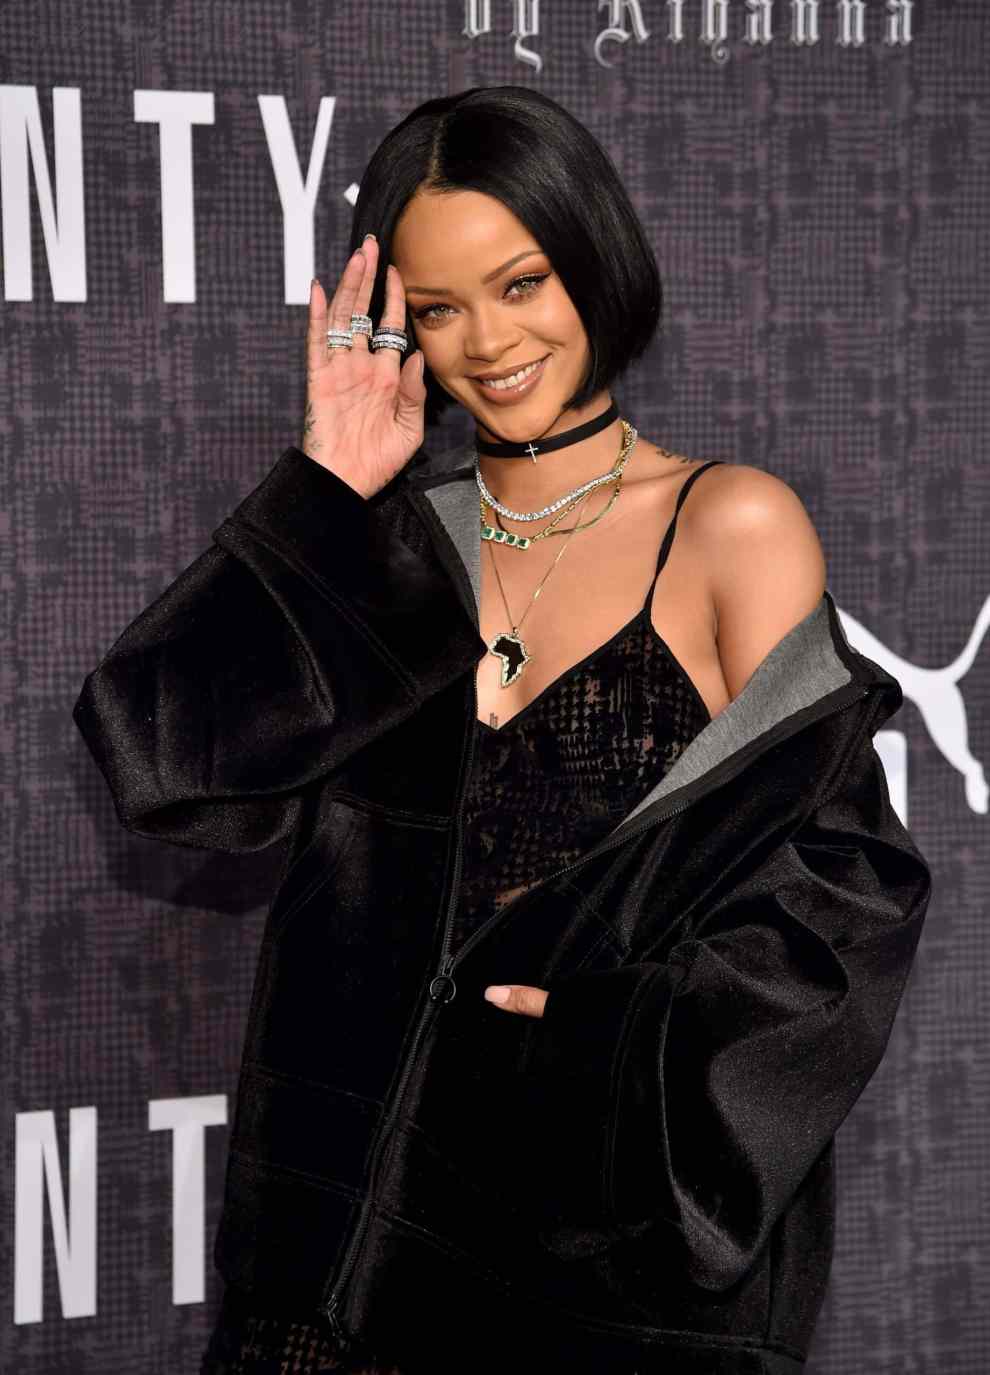 Rihanna attends the FENTY PUMA by Rihanna AW16 Collection during Fall 2016 Fashion Week